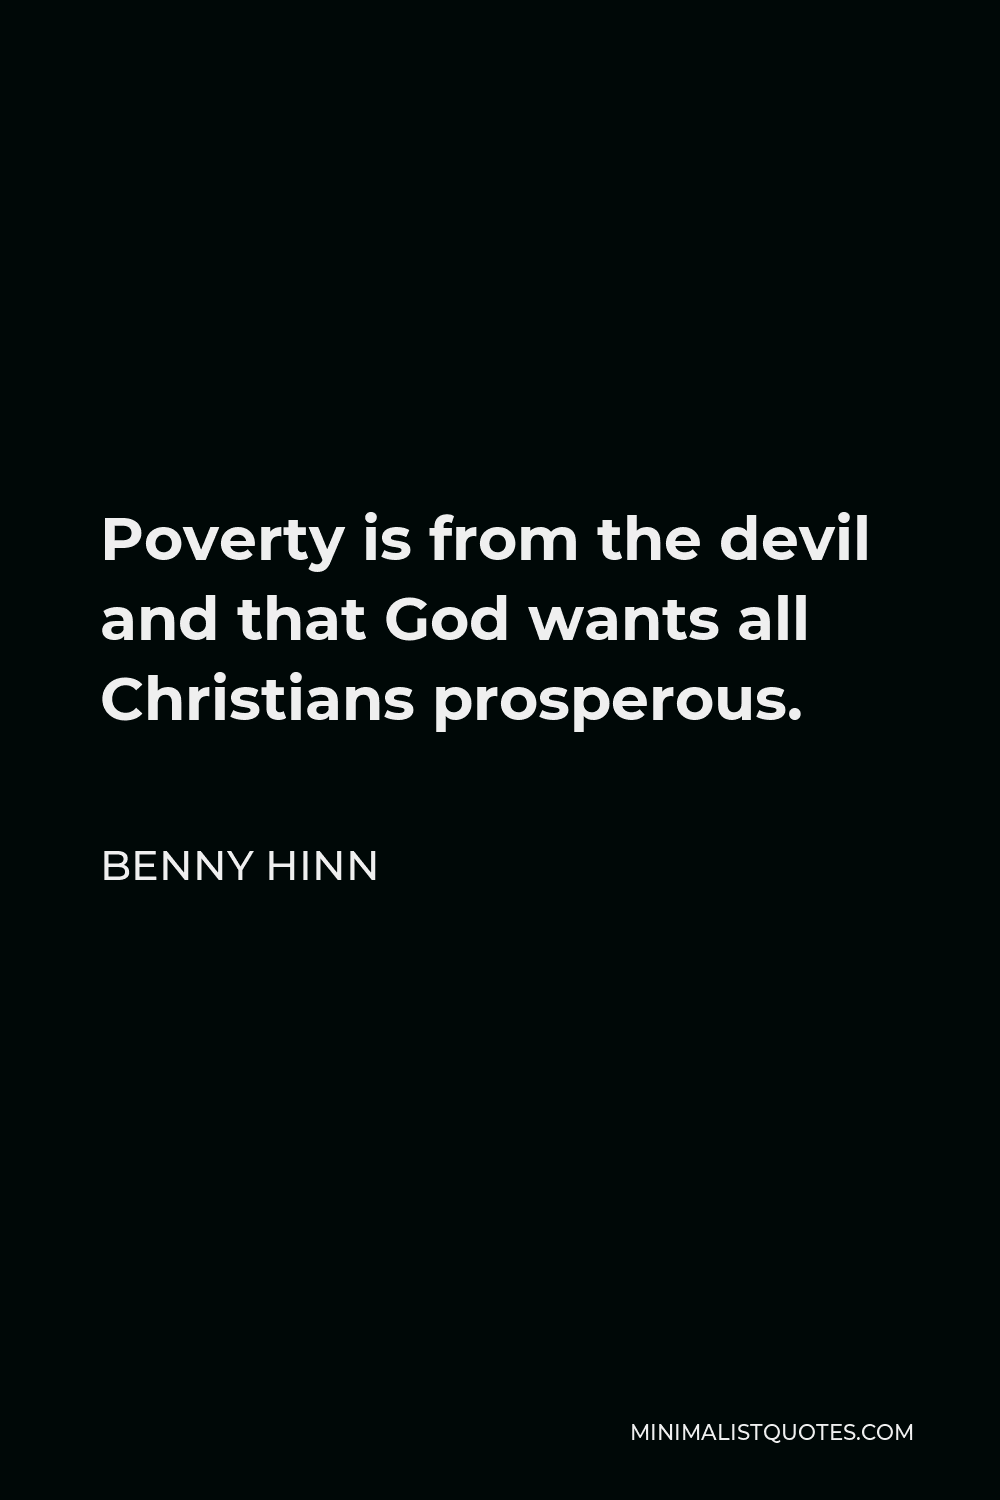 Benny Hinn Quote - Poverty is from the devil and that God wants all Christians prosperous.